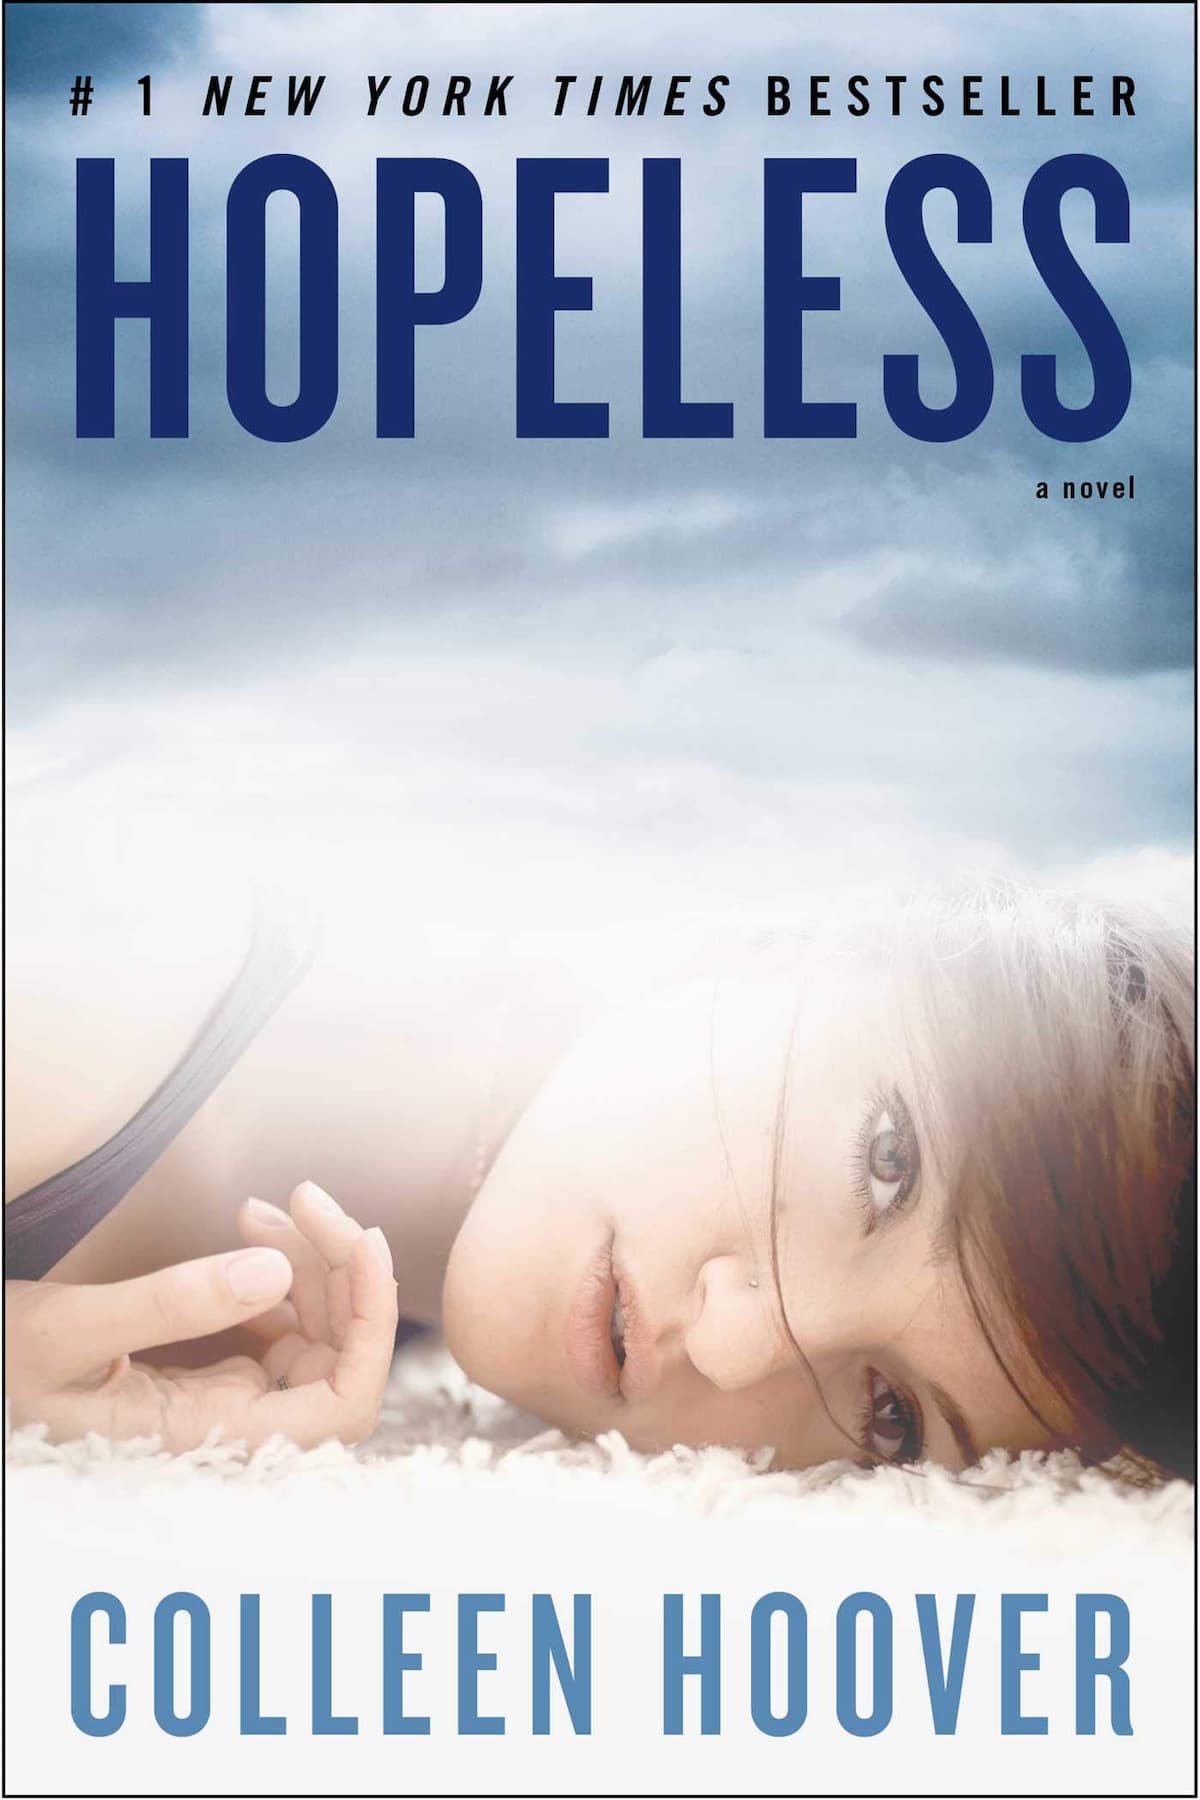 Bestsellers, Colleen Hoover Books In Order, Contemporary Romance, Fiction, Hopeless Books In Order, Hopeless series, New Adult Romance, Romance, Hopeless By Colleen Hoover (Hopeless Series Book 1)